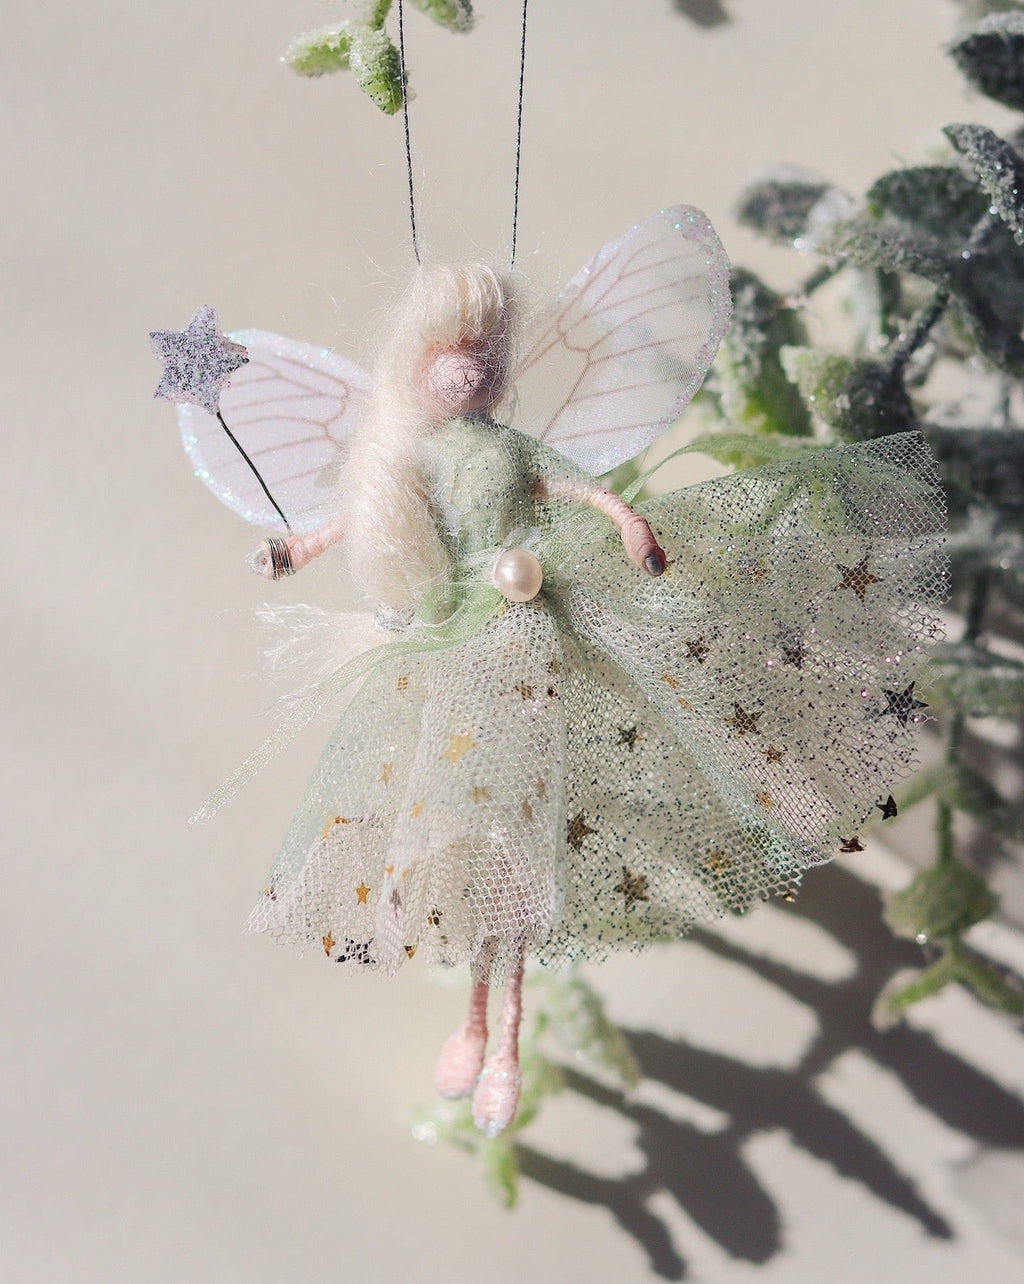 This little fairy is dressed in a pale green glitter tulle with a gold star underskirt. She has sashed her gown at the waist with a green Organza ribbon and a pearl tooth trim. She has little shoes dipped in glitter and her glittered wand to grant you your wishes!